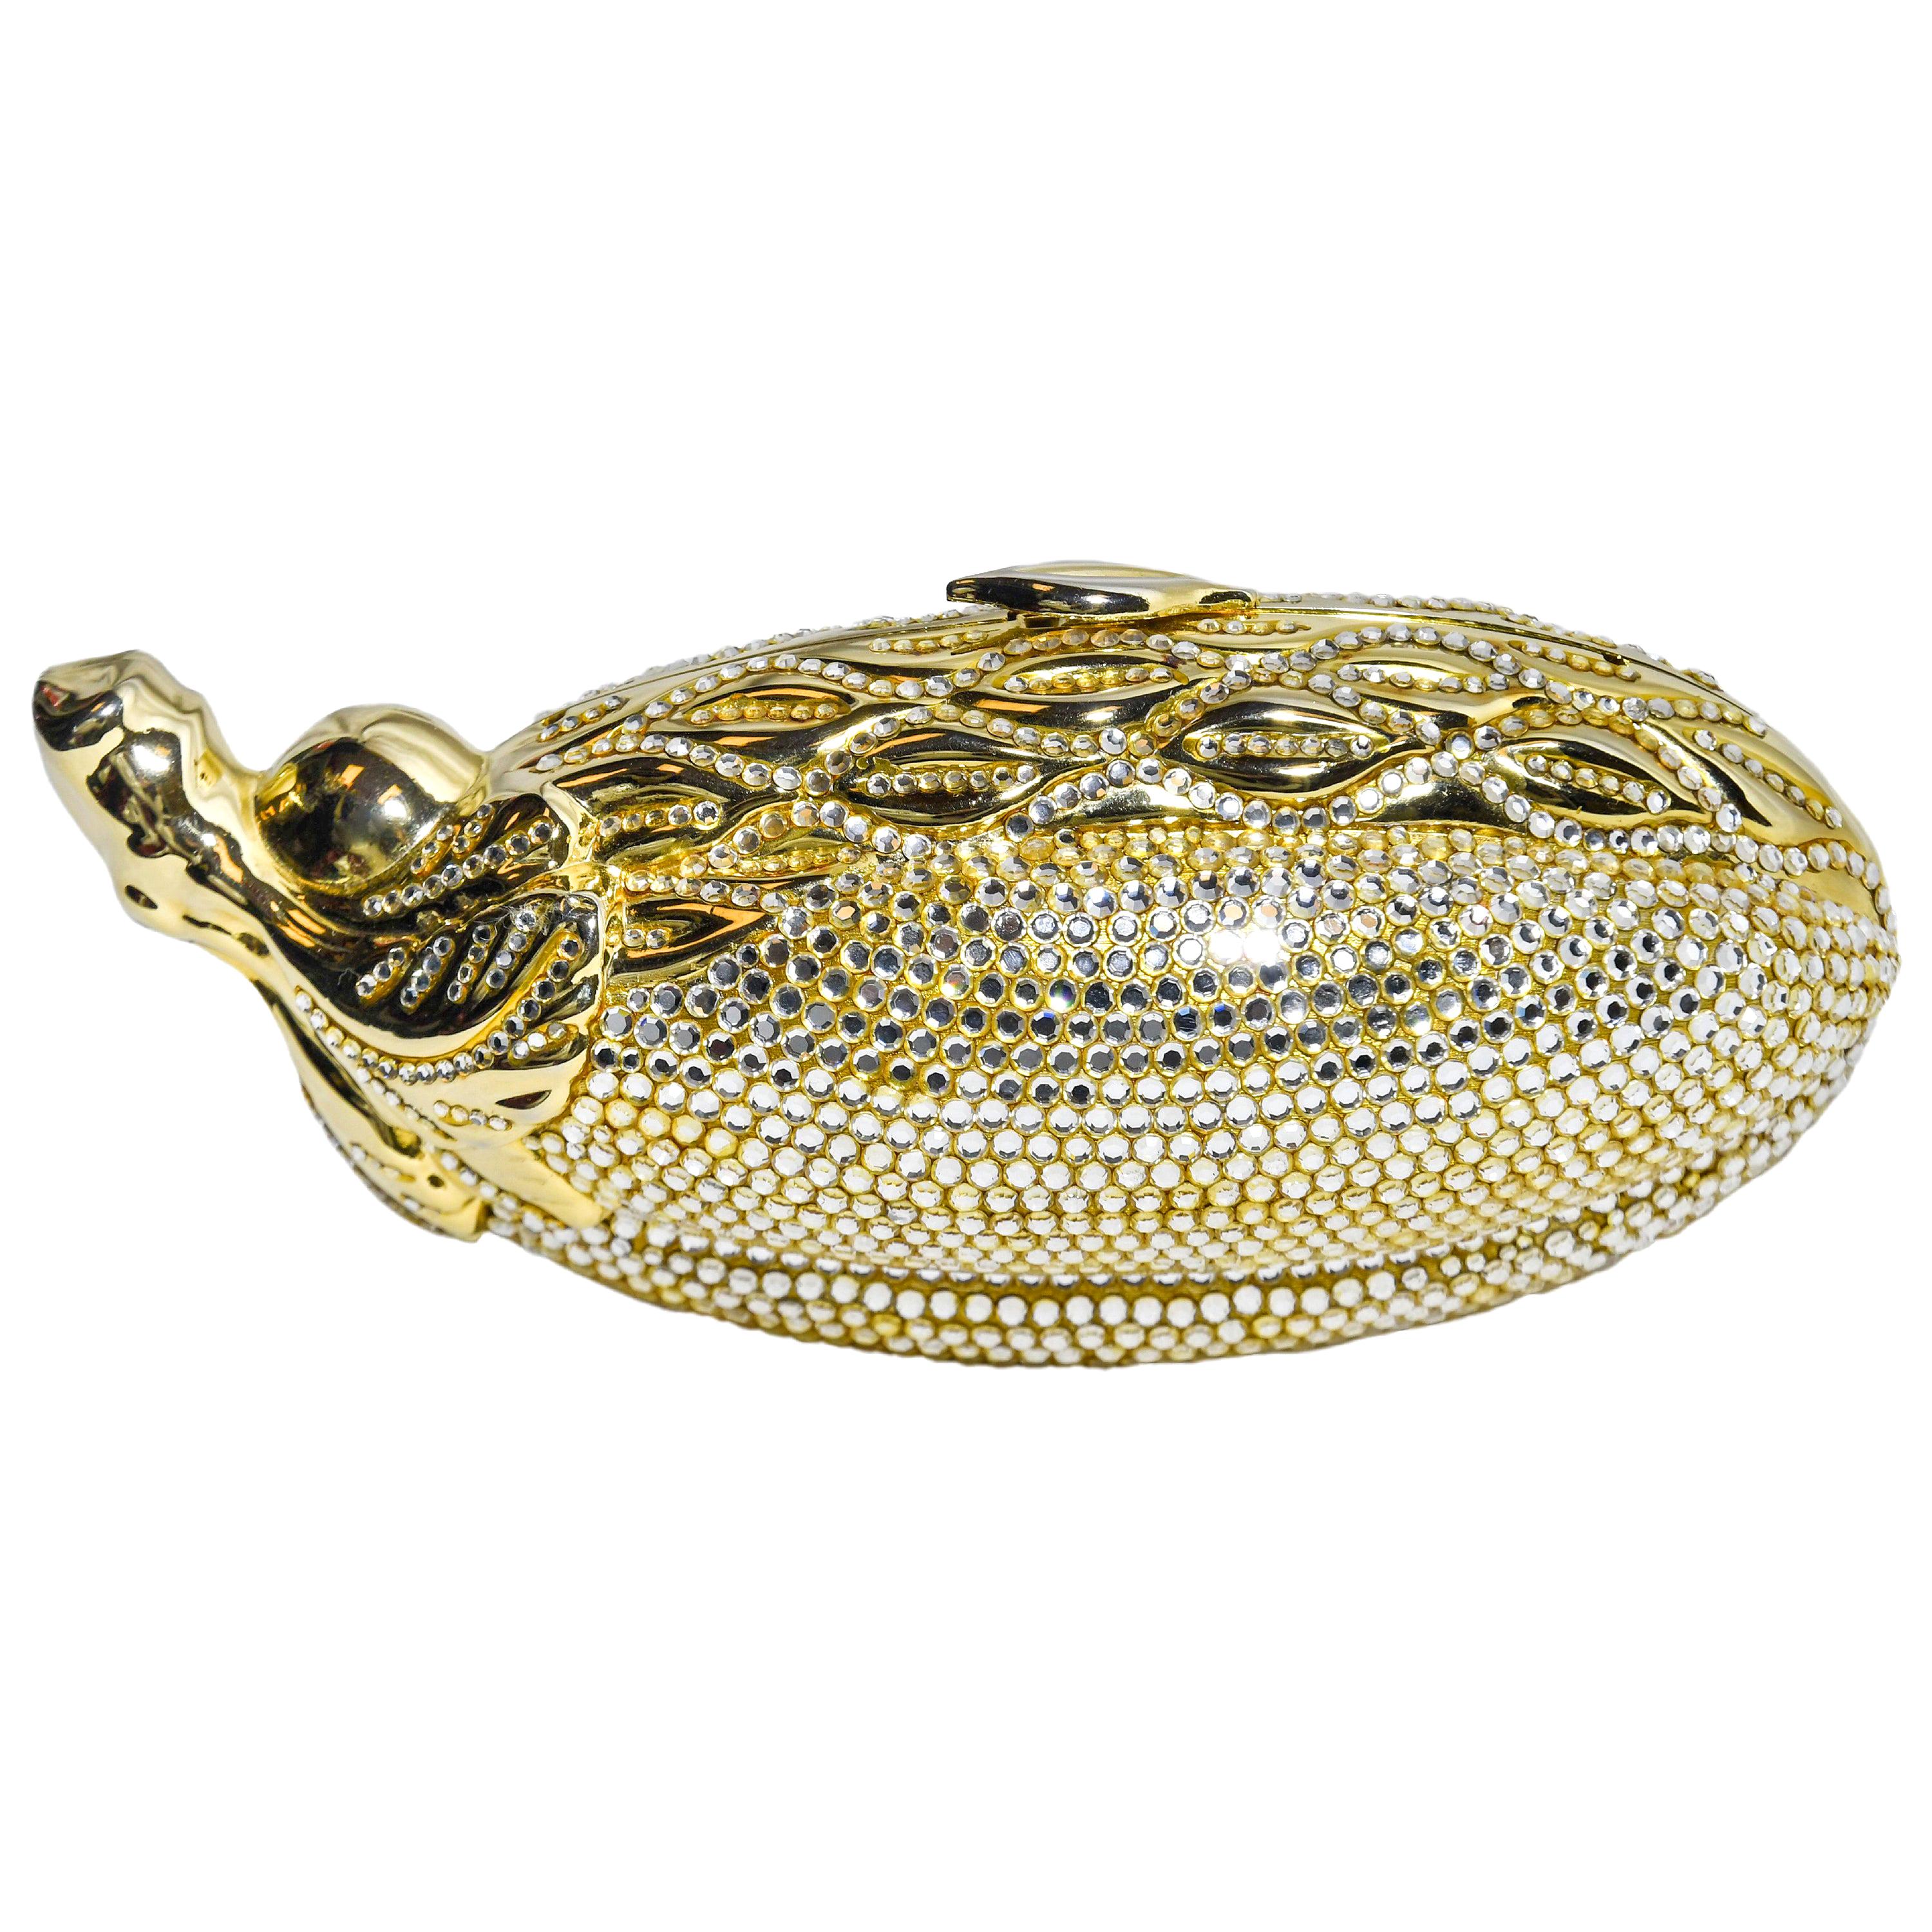 Judith Leiber Gold Tone and Crystal Eggplant Minaudiere